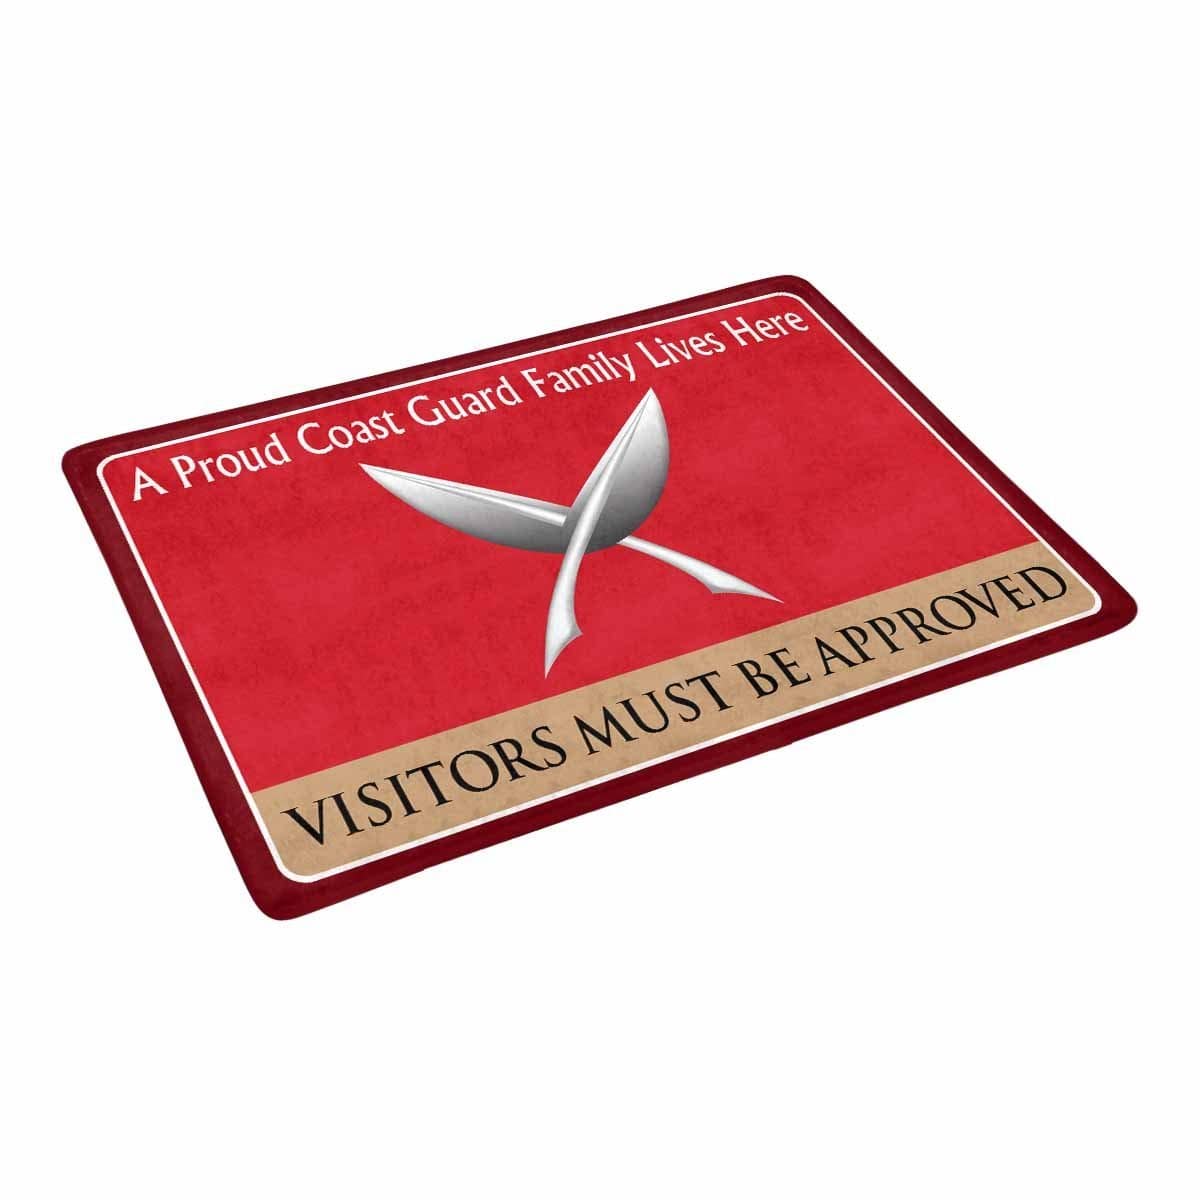 US Coast Guard Yeoman YN Logo Family Doormat - Visitors must be approved (23.6 inches x 15.7 inches)-Doormat-USCG-Rate-Veterans Nation